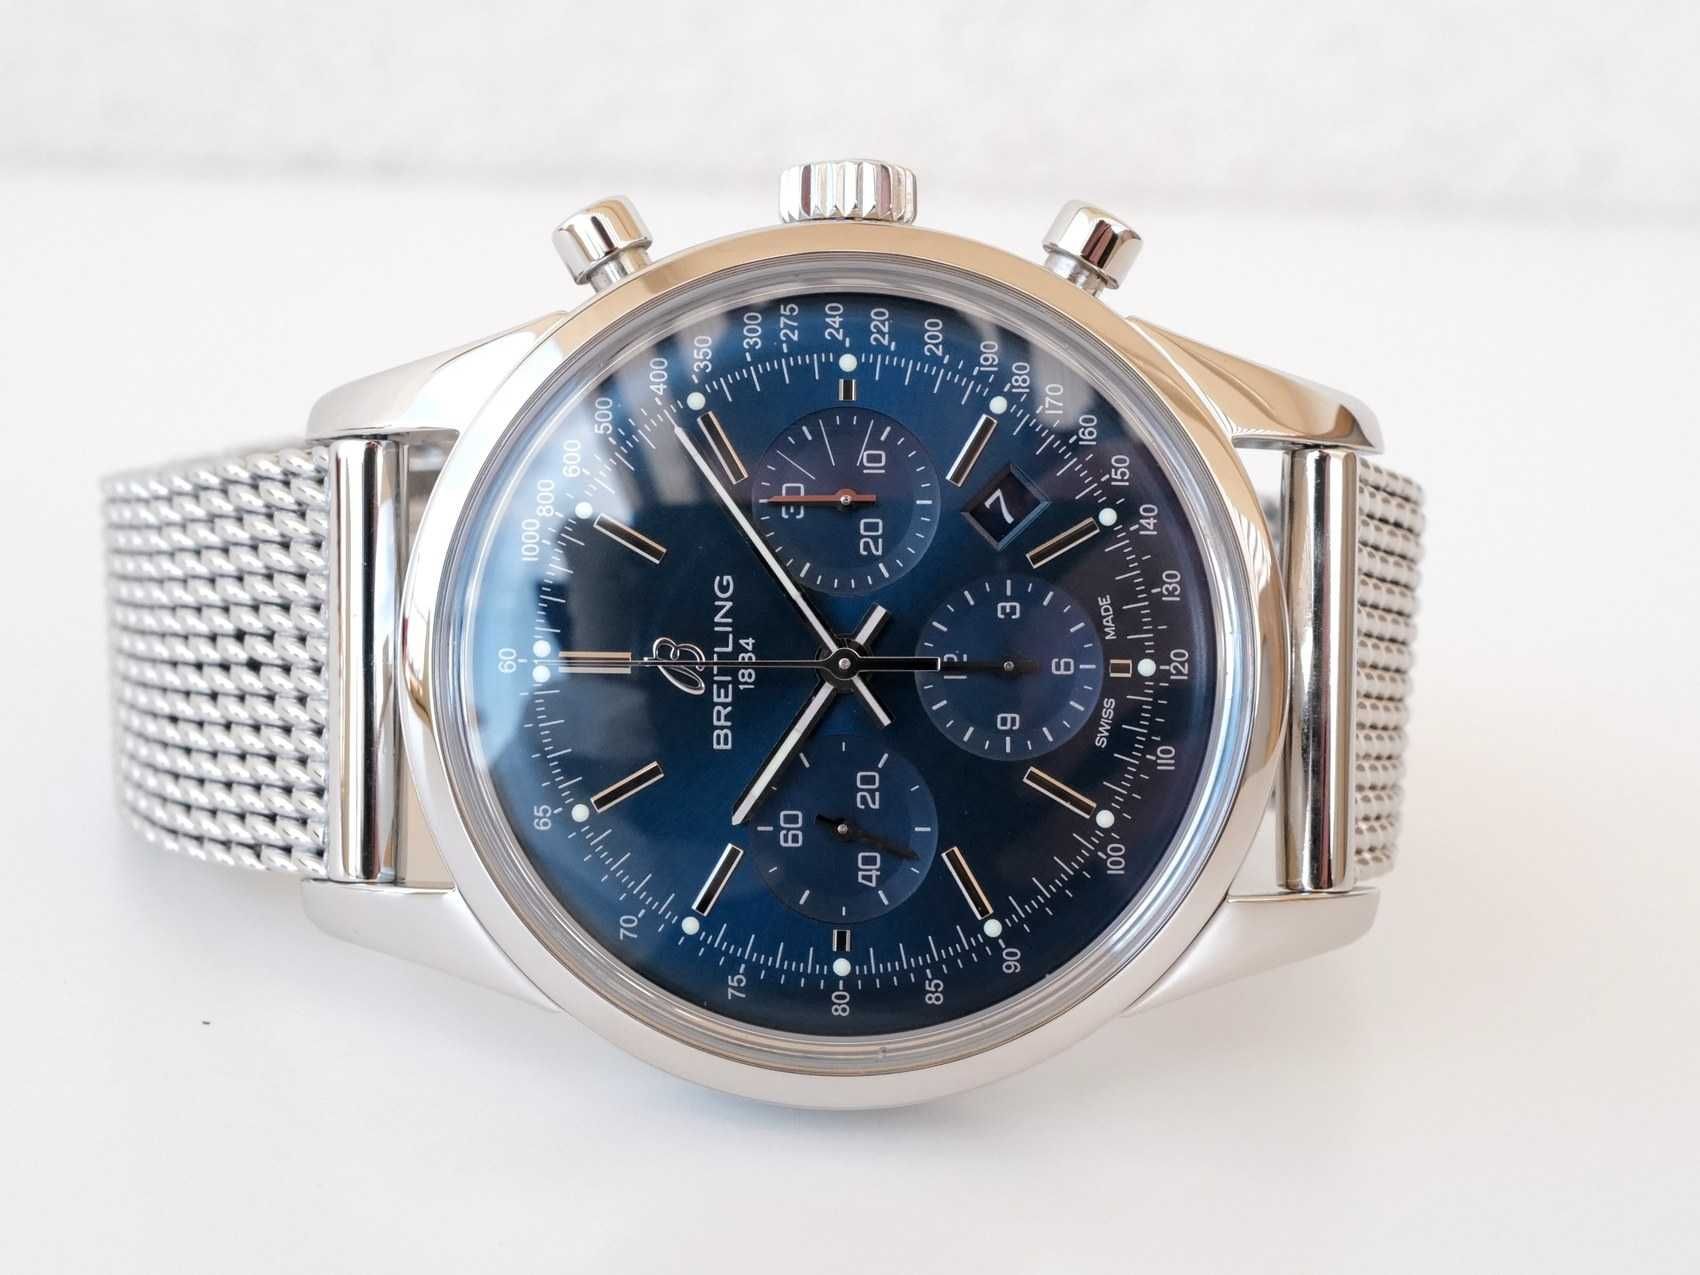 Breitling Transocean Chronograph Blue Dial 43 Limited Edition